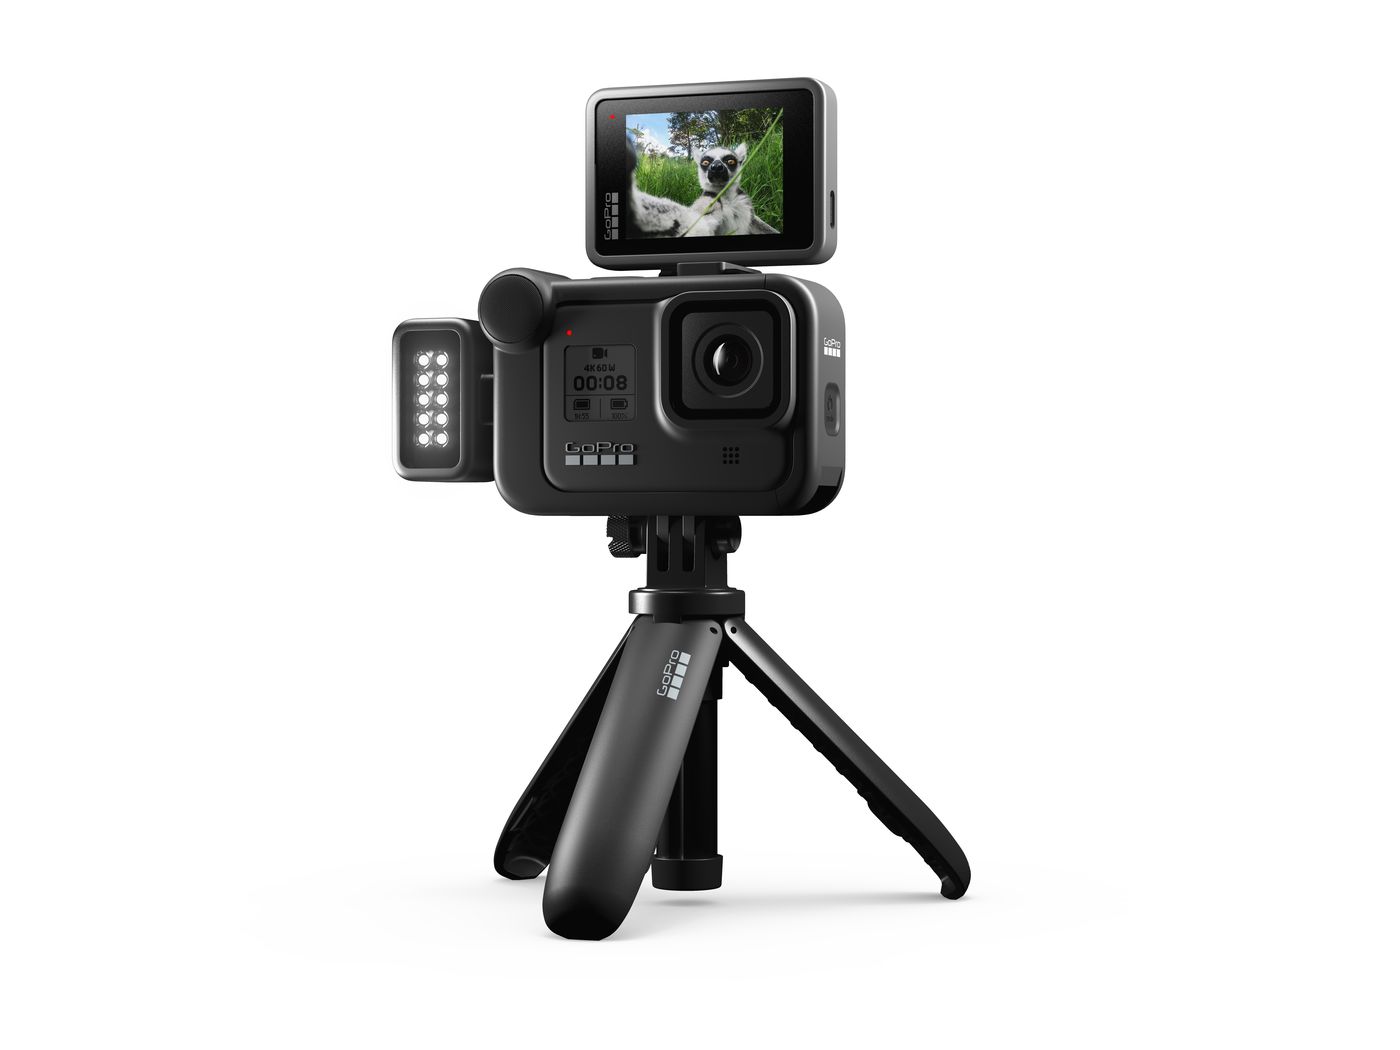 GoPro's Hero 8 Black has new 'Mod' accessories made for vloggers